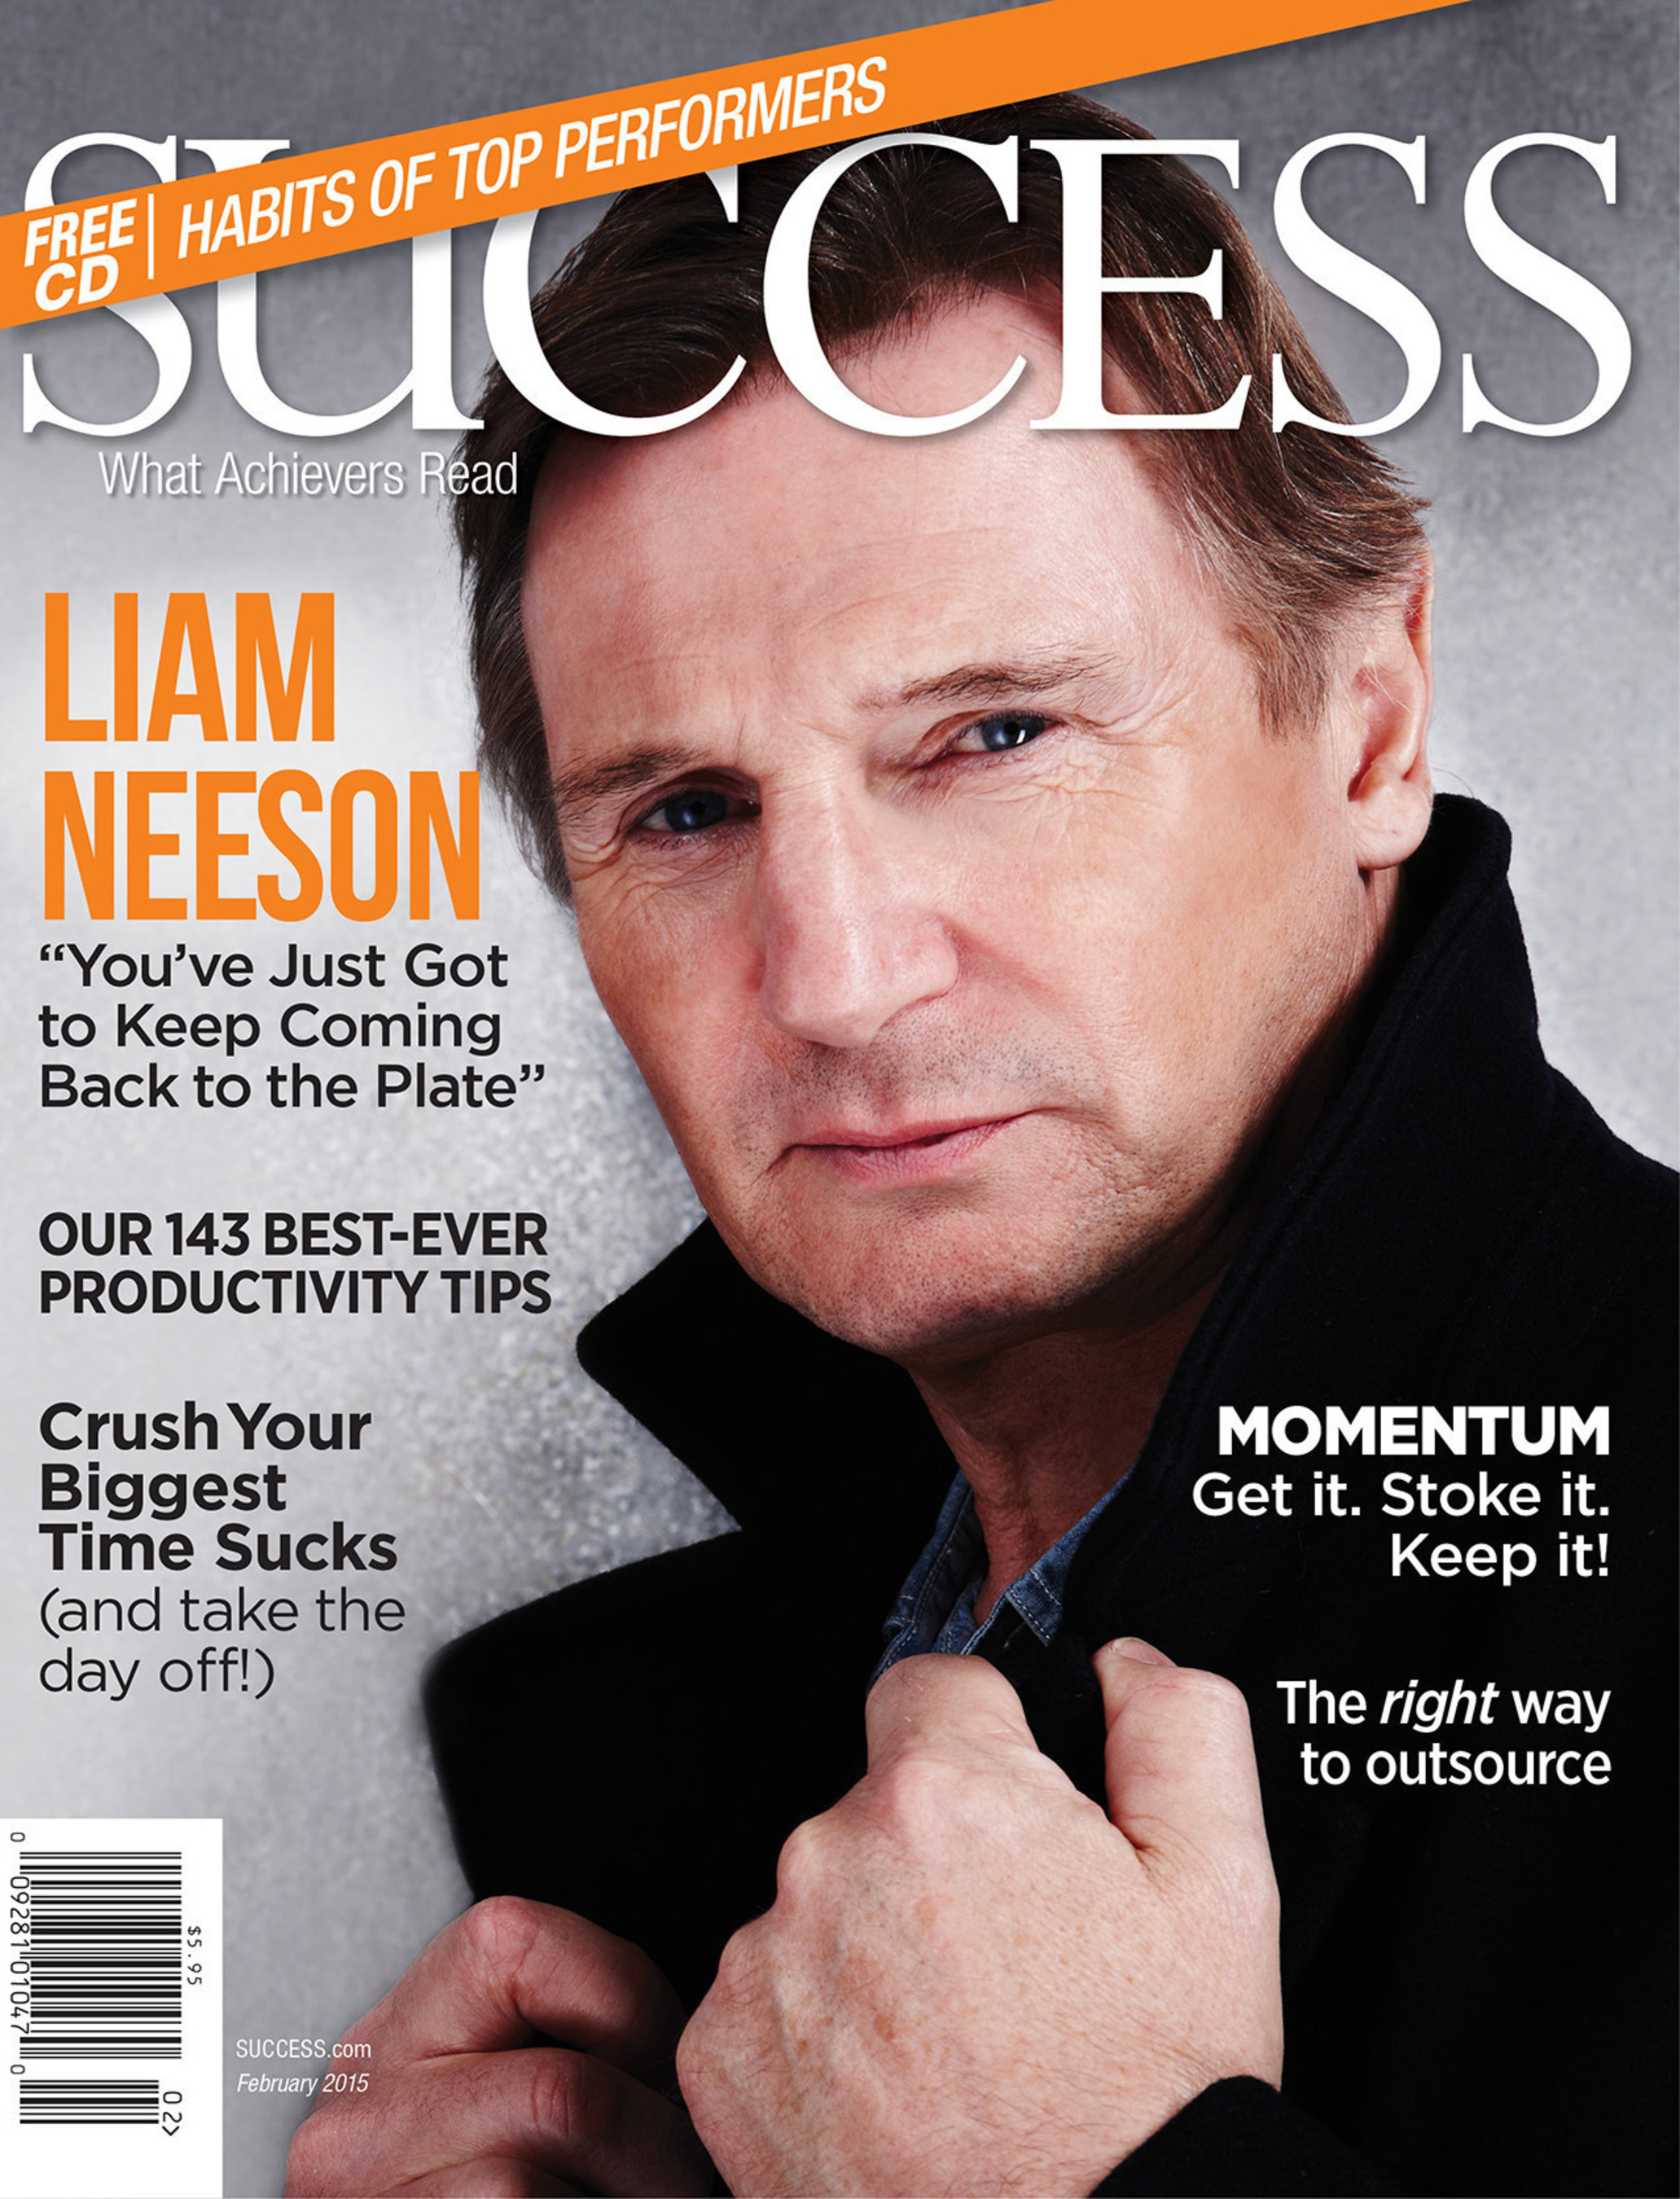 Liam Neeson opens up about unbearable loss in his life and how he copes.